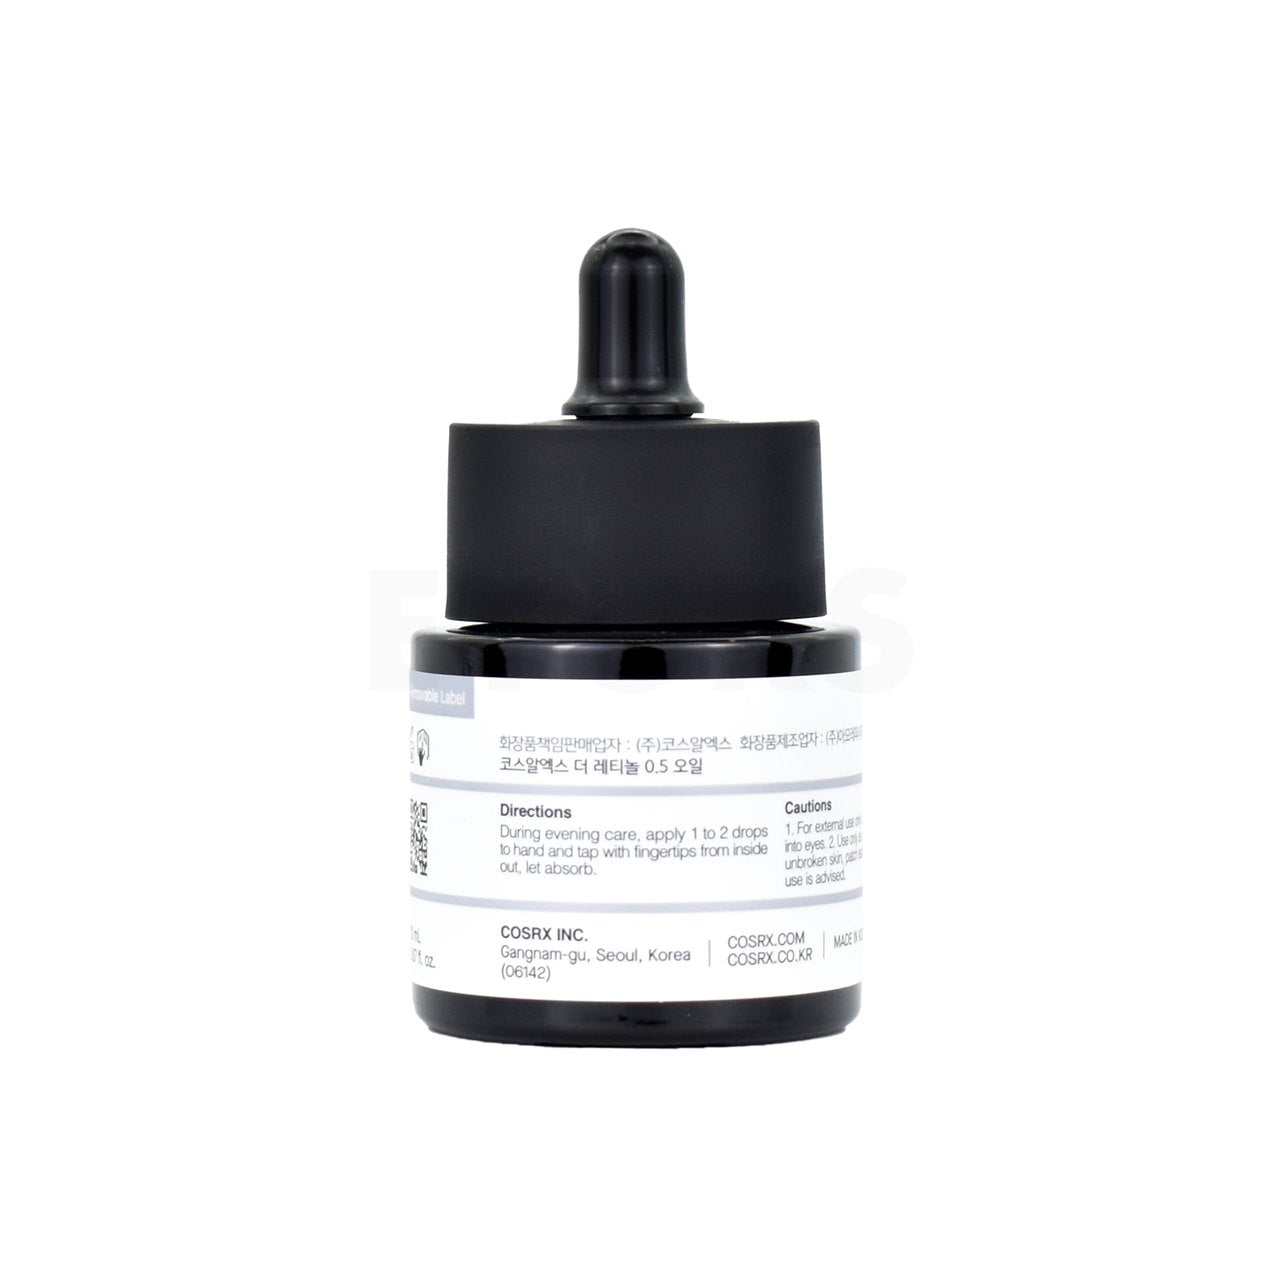 cosrx the retinol 0.5 oil directions labeling